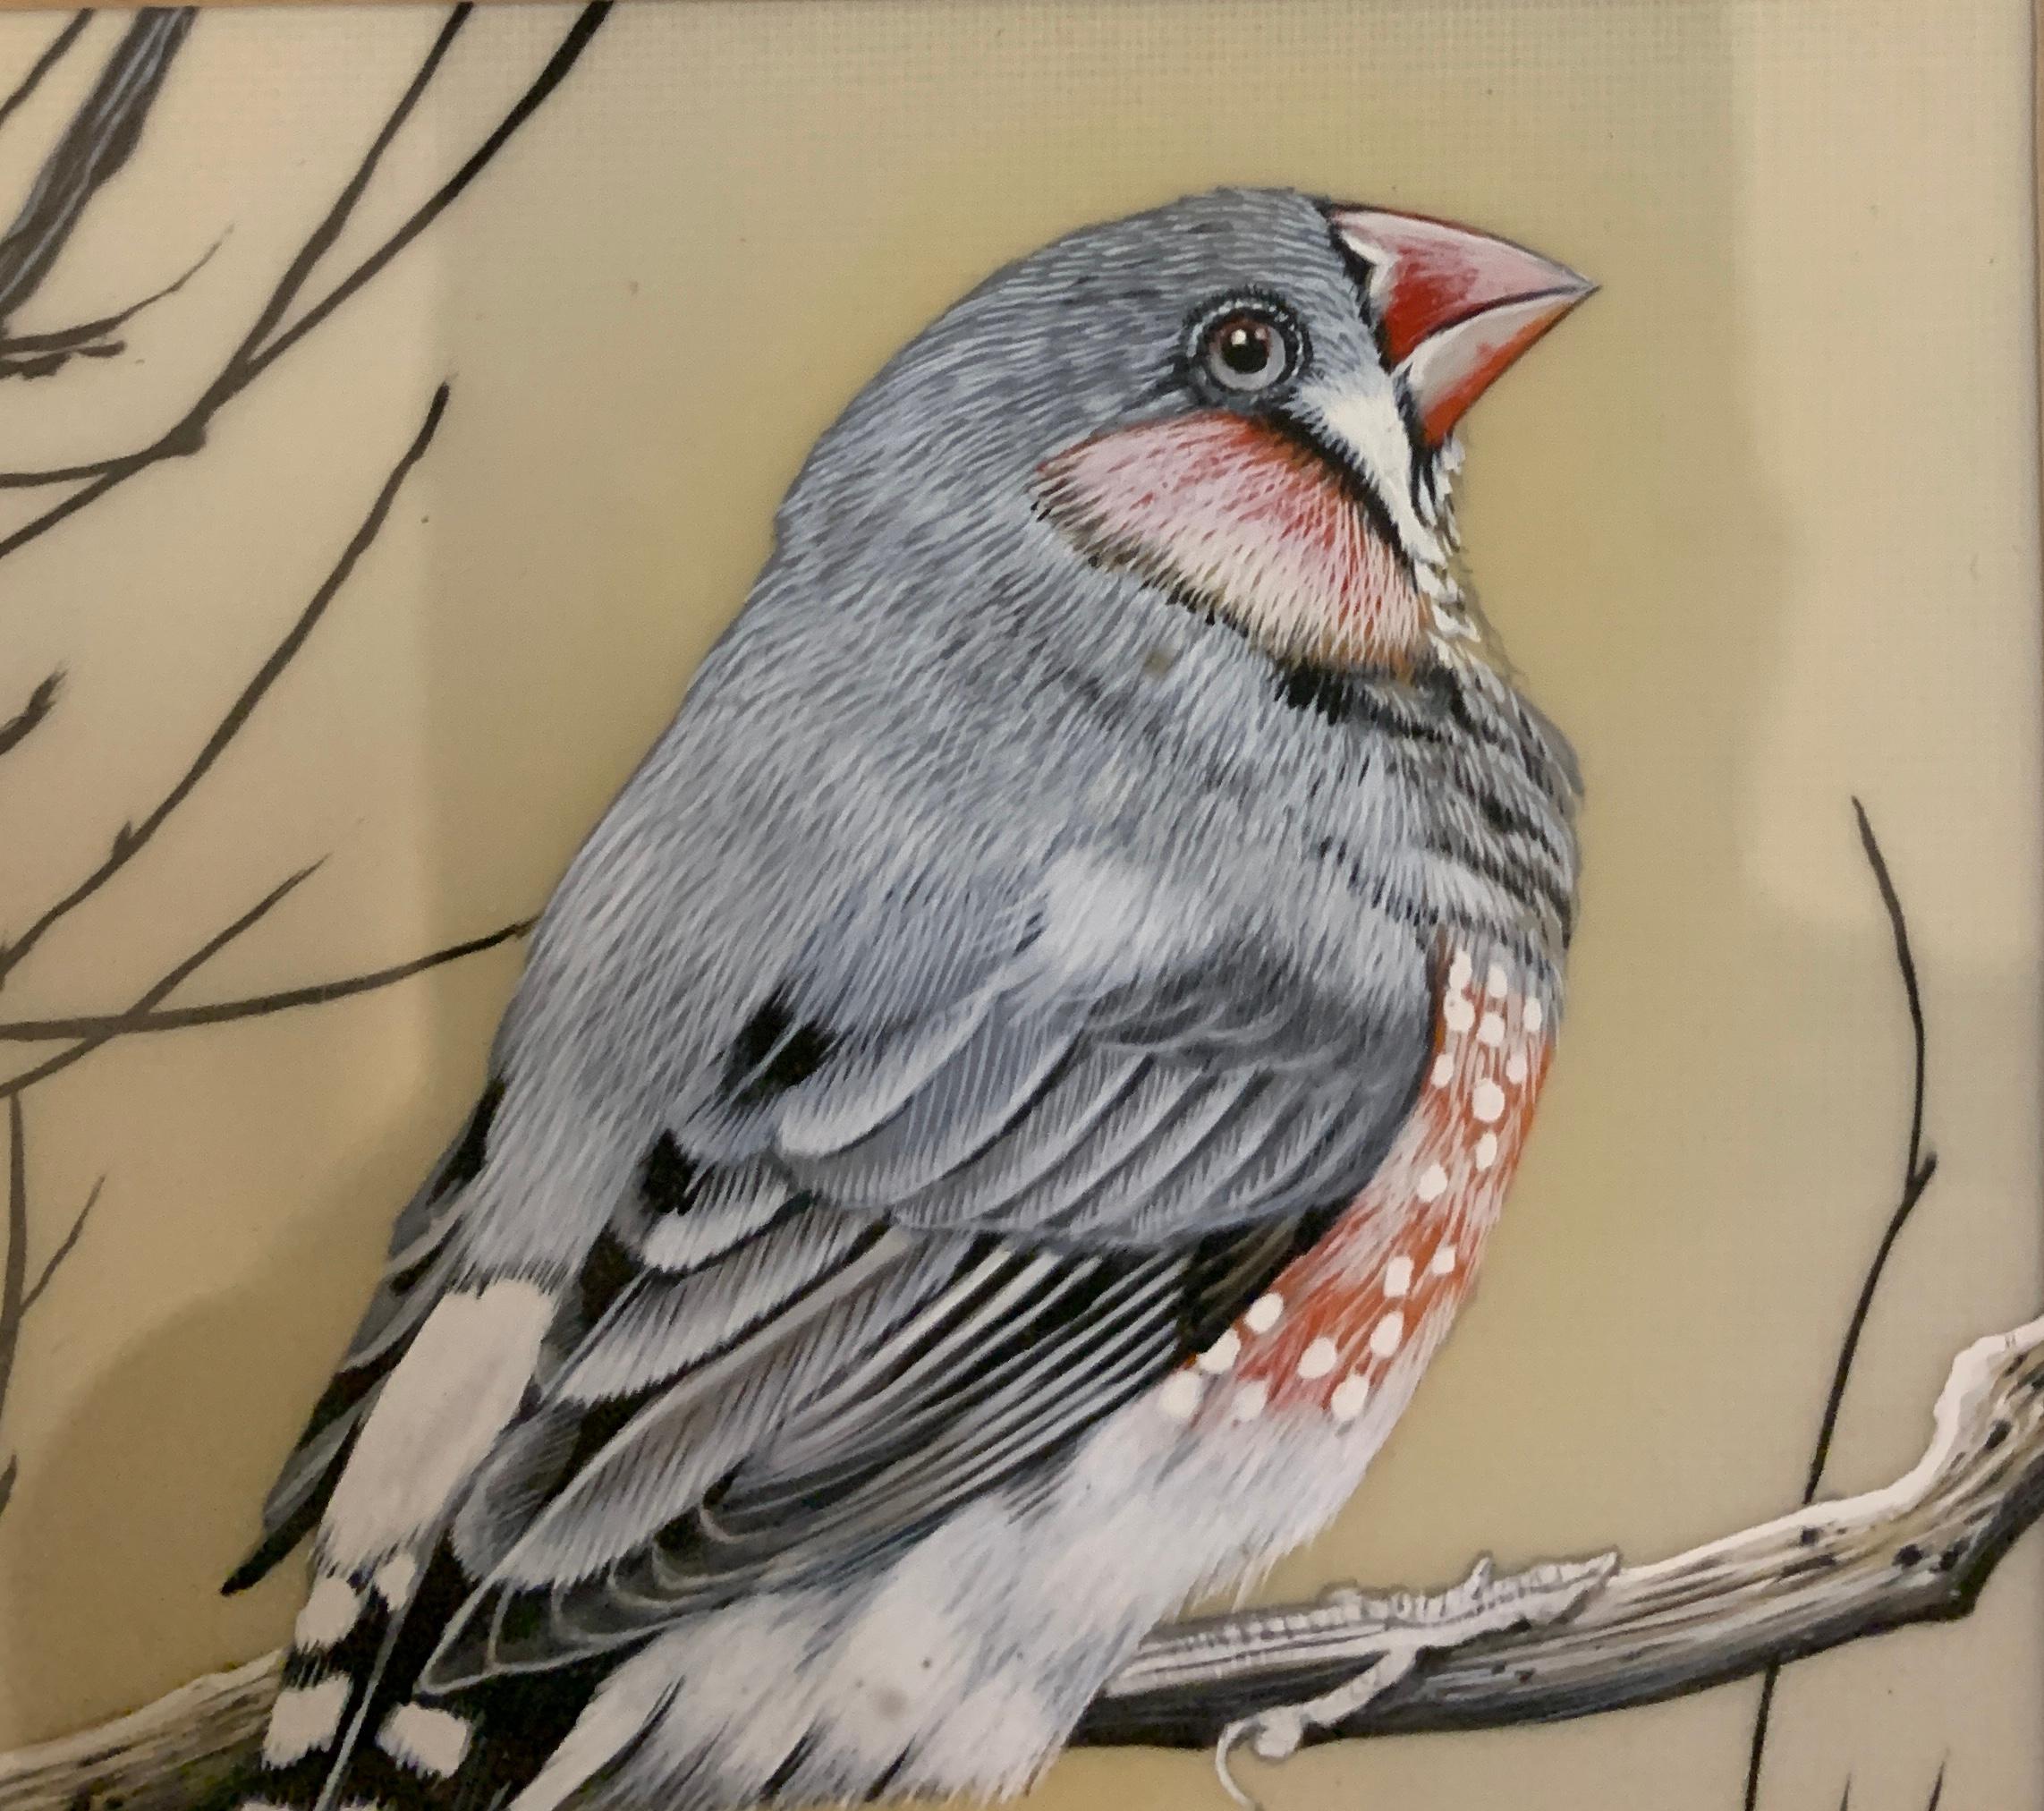 English 20th century study of a Finch bird seated on a snow covered branch - Art by James Williamson-Bell